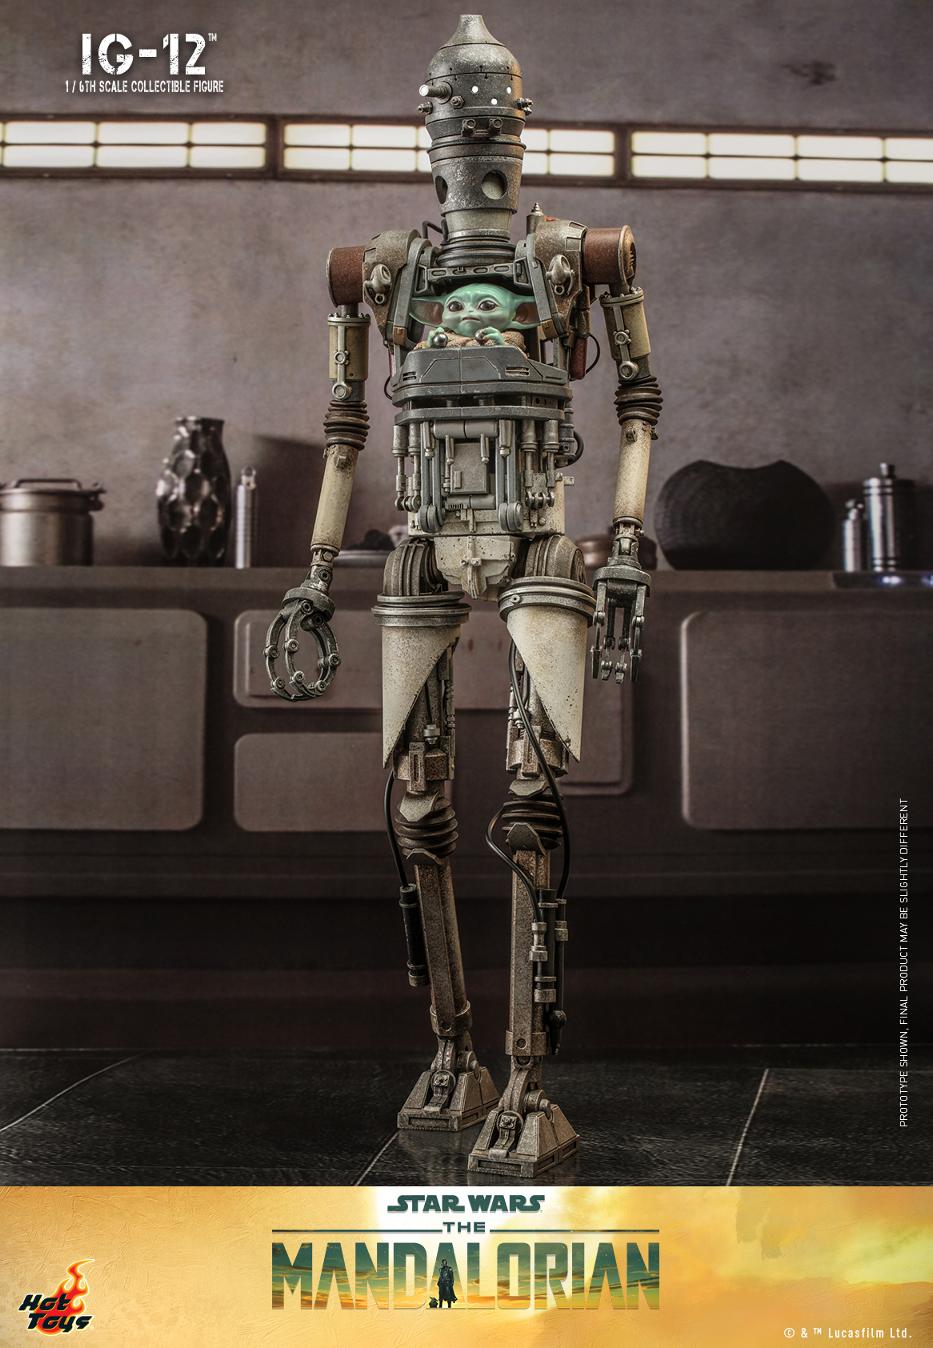 Star Wars: The Mandalorian - 1/6th scale IG-12 Collectible Figure - Hot Toy Ig-12_11